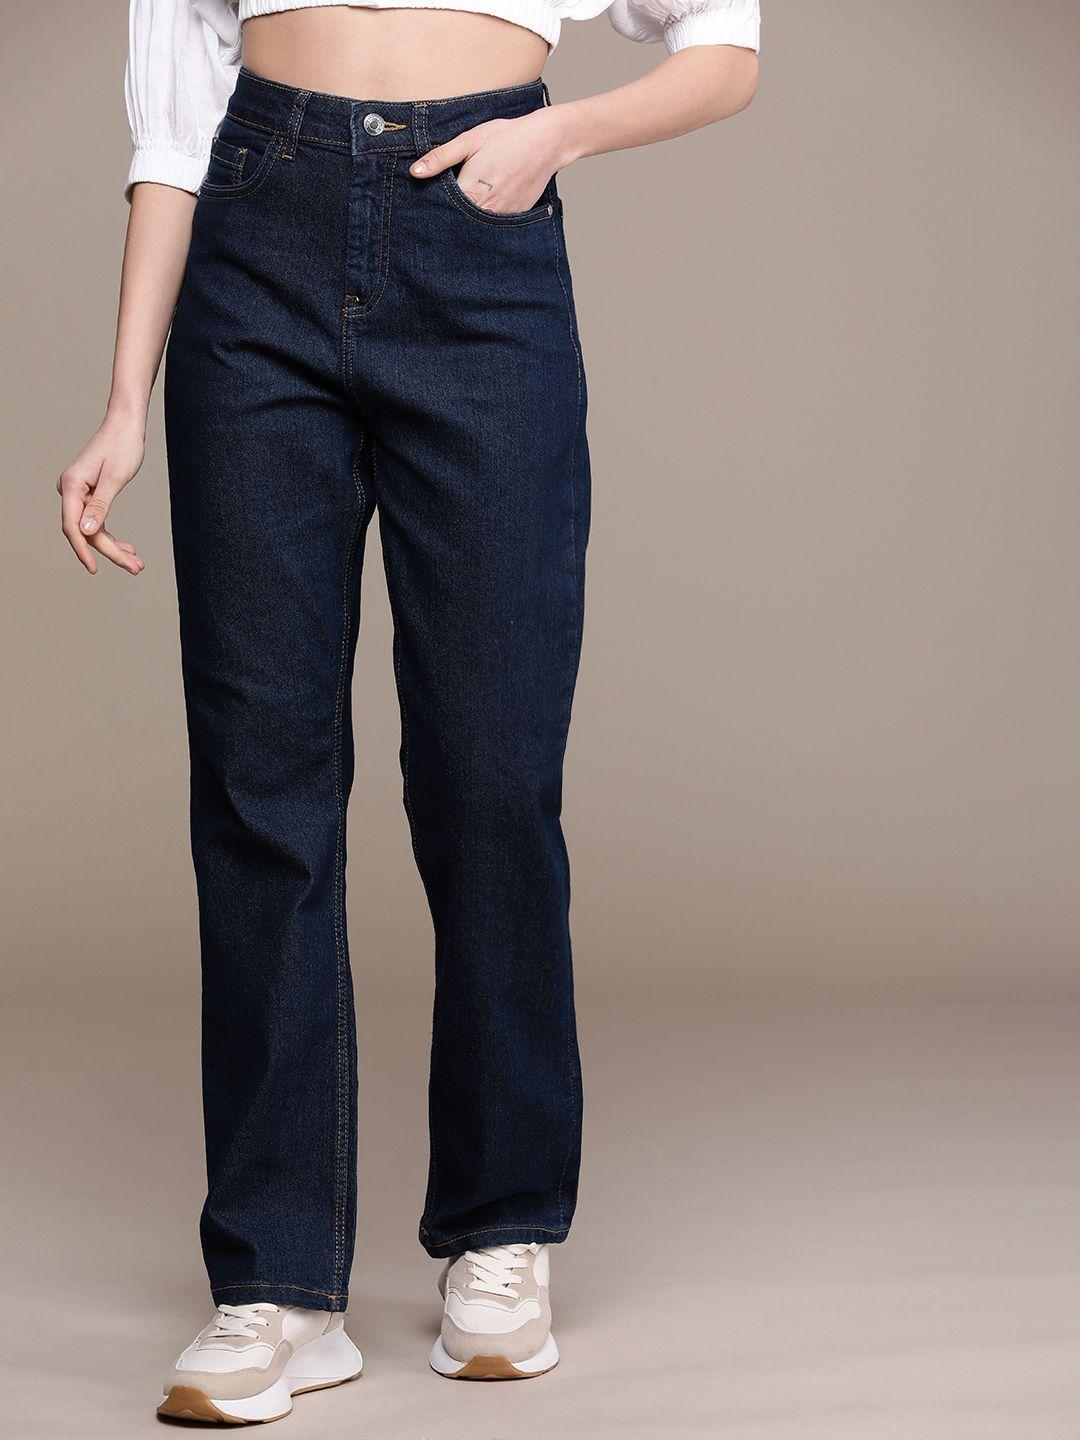 the roadster life co. women straight fit high-rise stretchable jeans